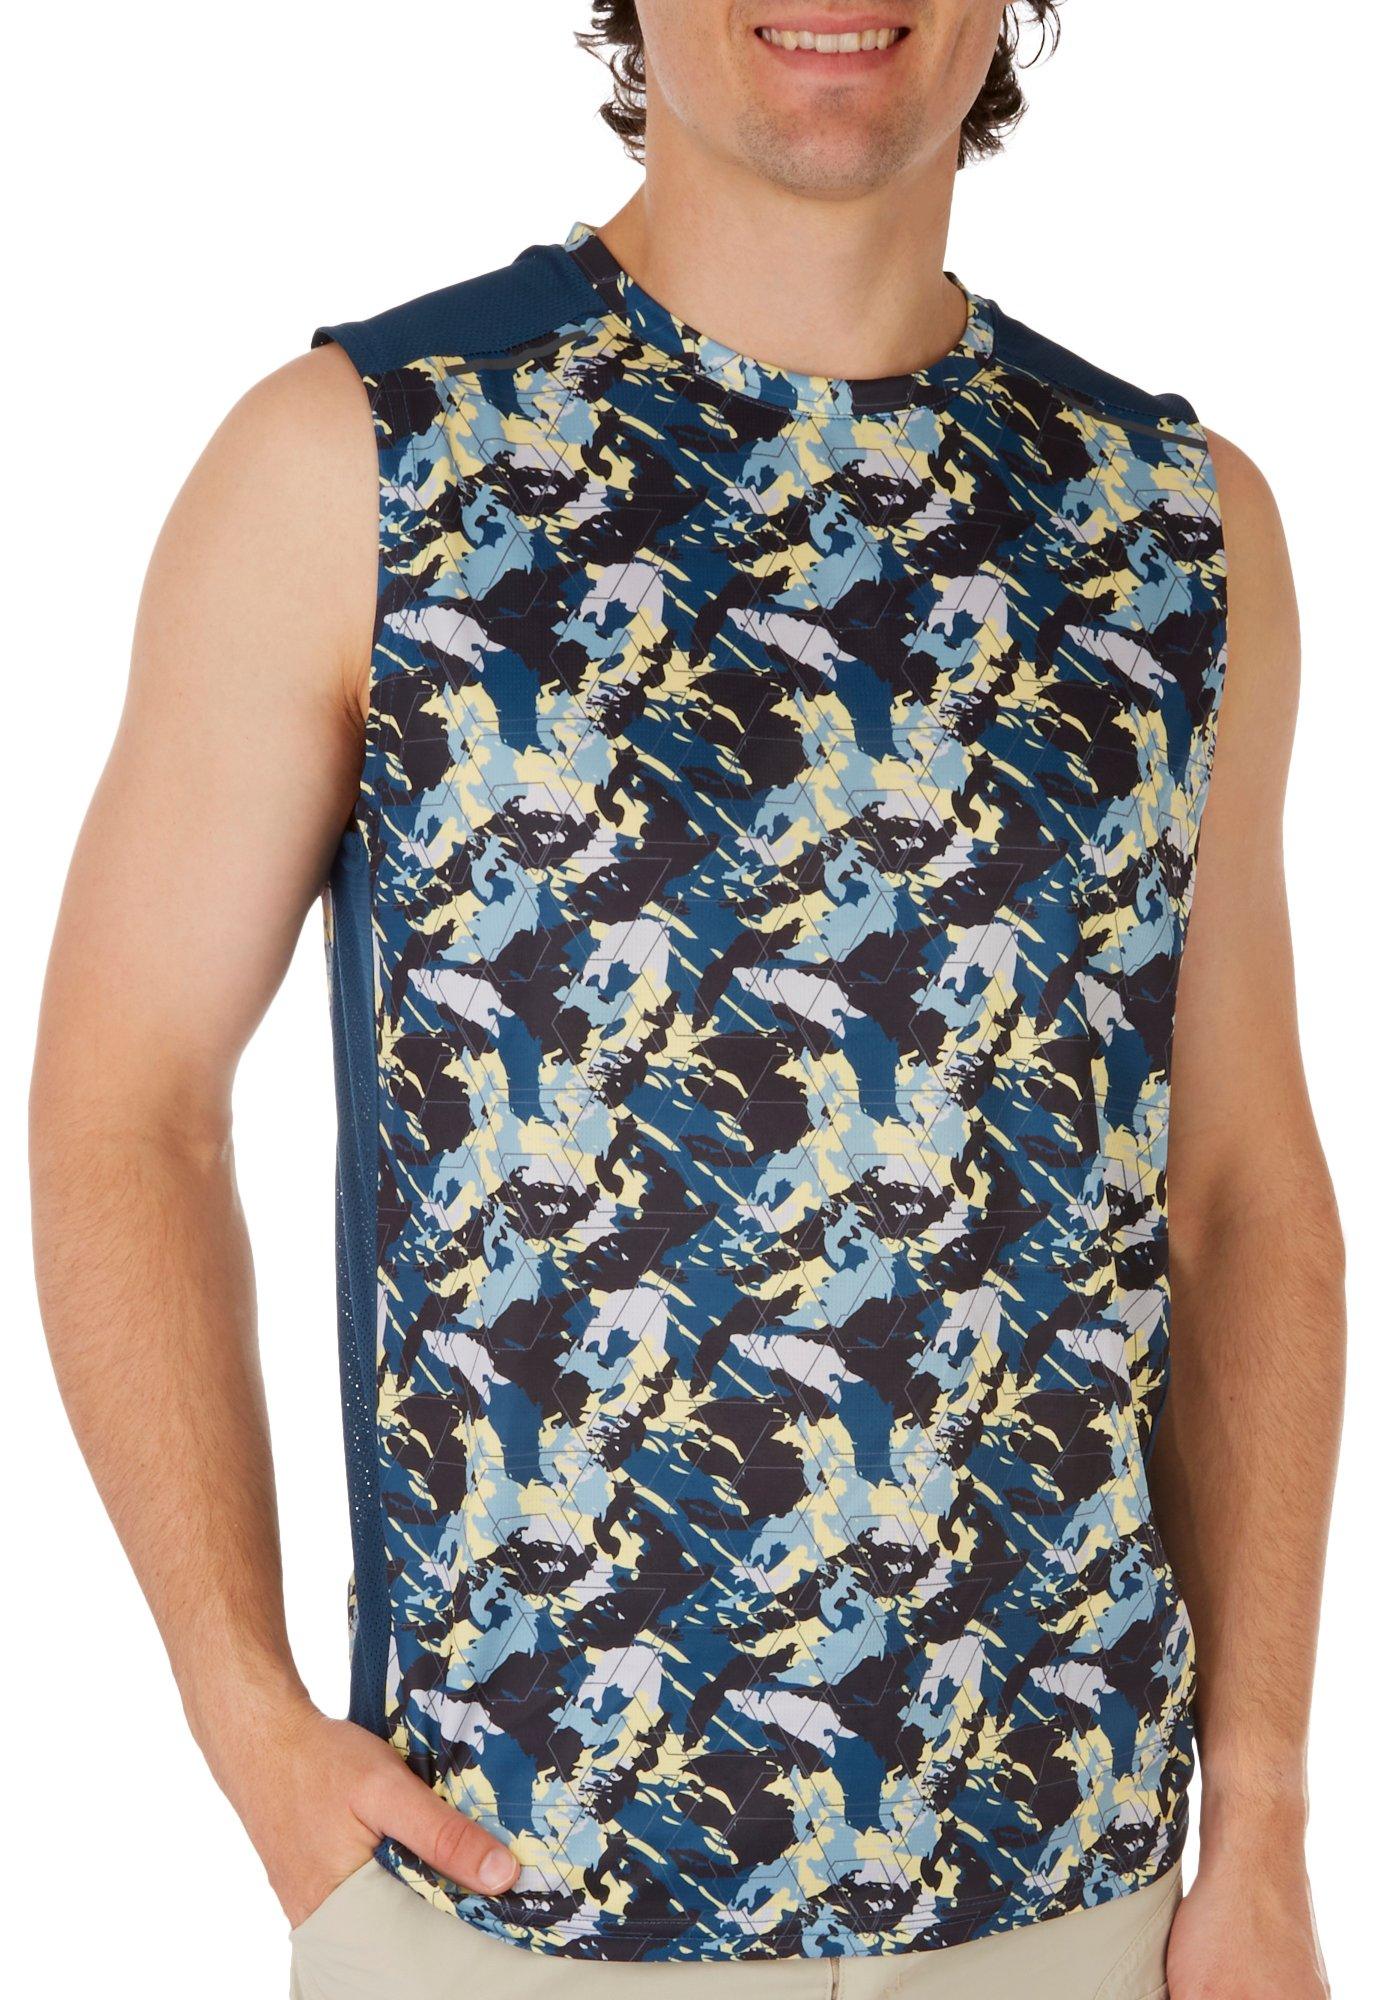 Mens Print Performance Vented Muscle Tank